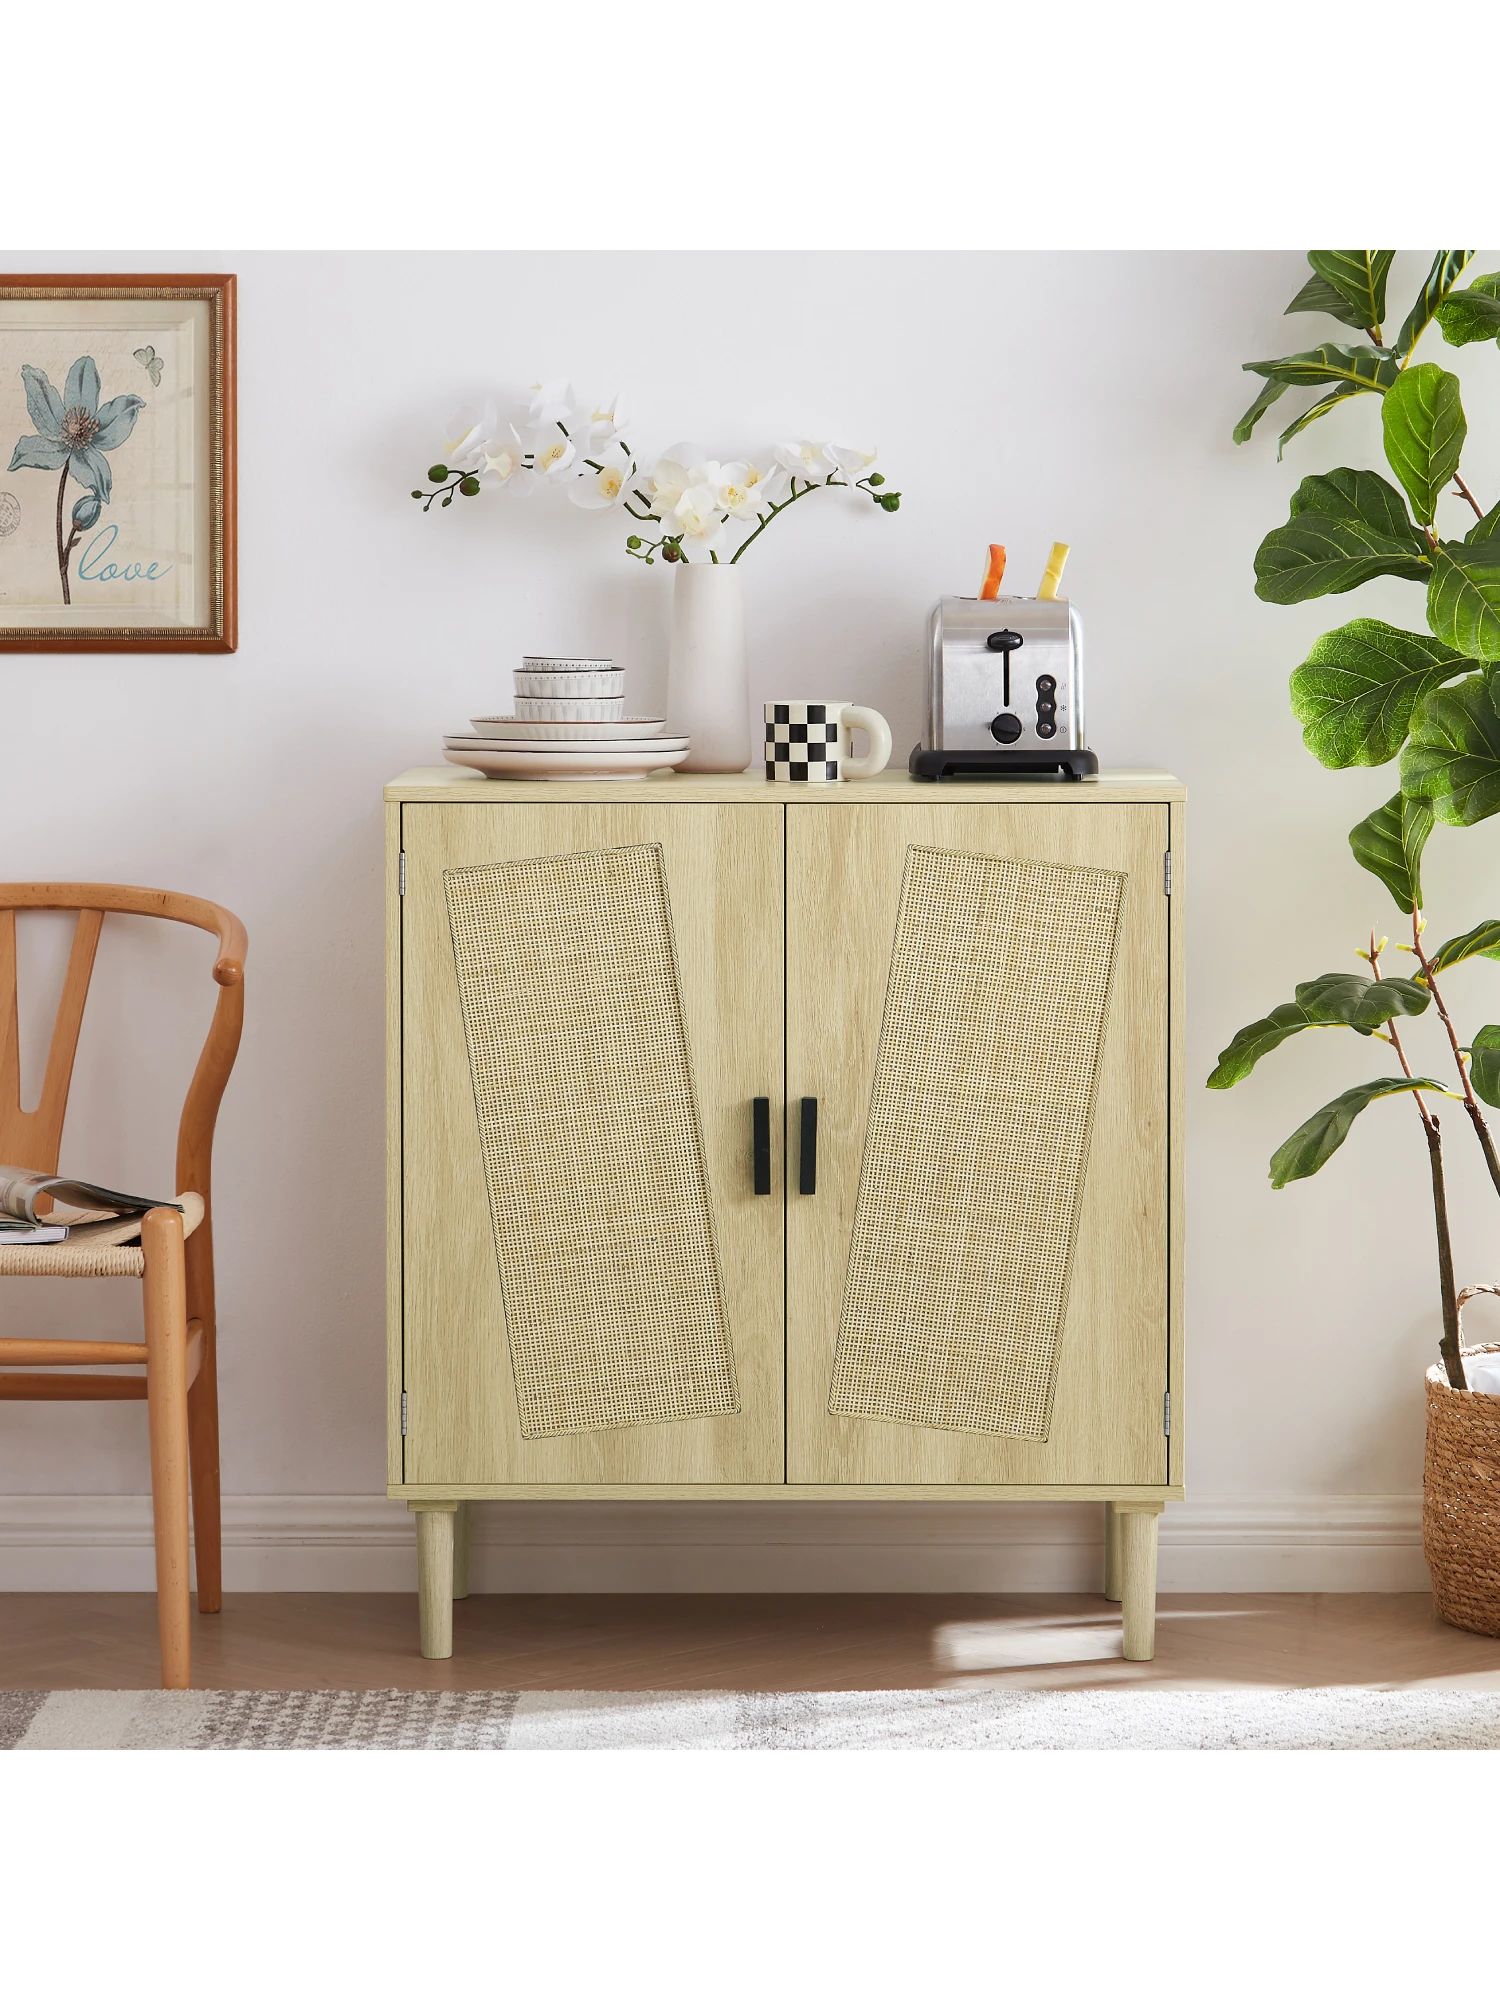 

Kitchen Storage Cabinets With Rattan Decorative Doors, Buffets, Wine Cabinets, Dining Rooms, Hallways, Cabinet Console Tables